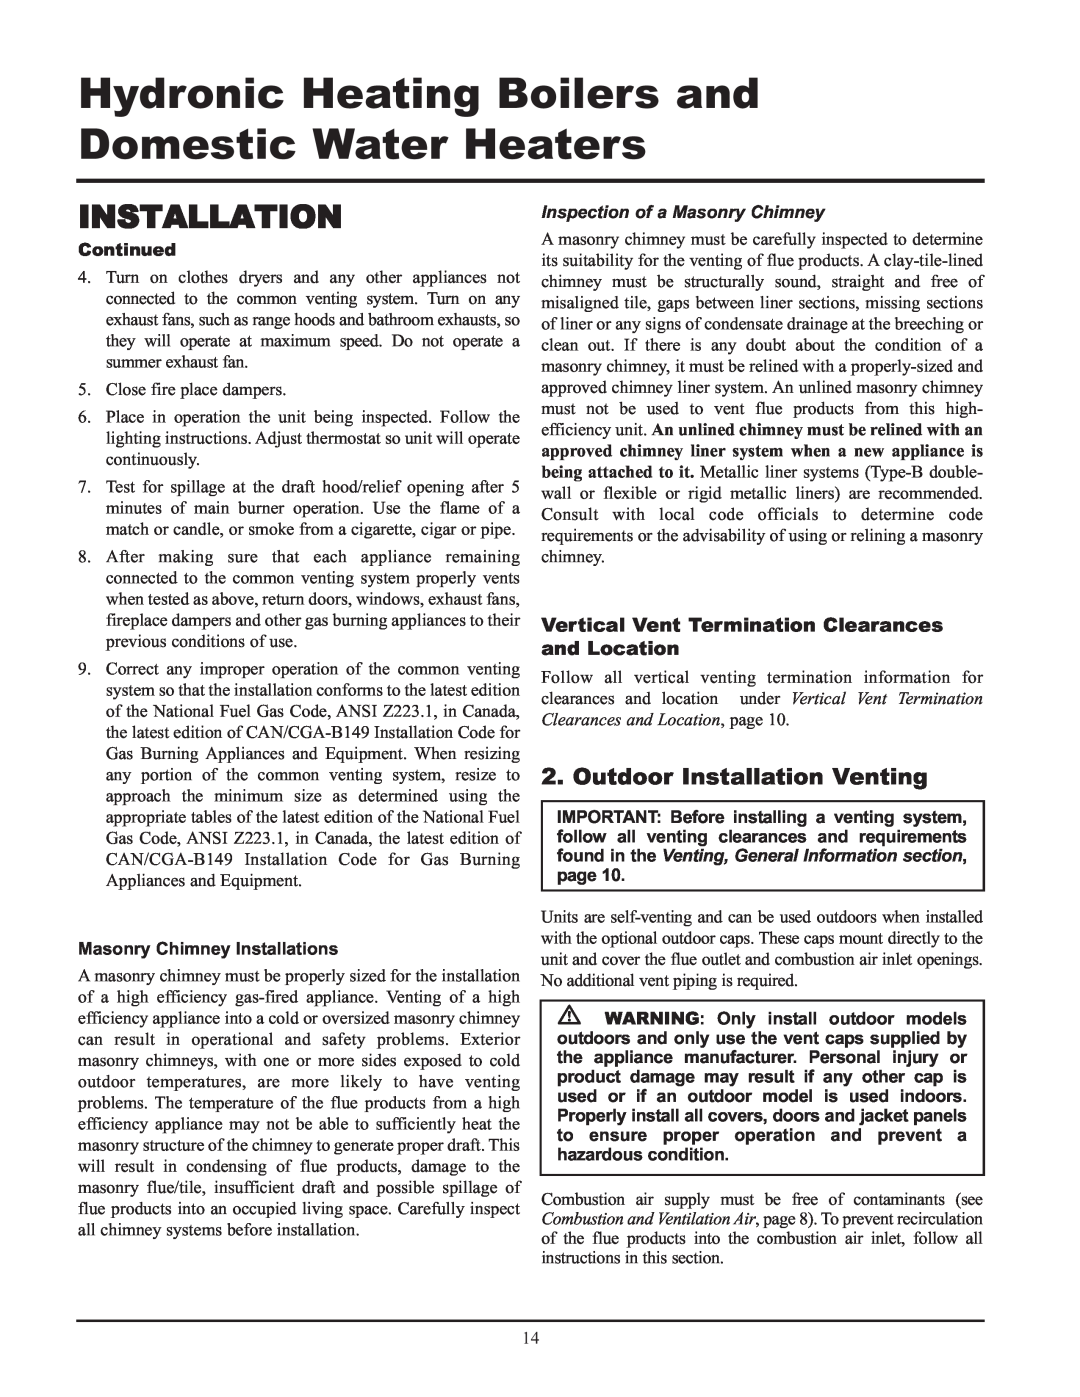 Lochinvar 000 - 2, 495, 065 service manual Outdoor Installation Venting, Vertical Vent Termination Clearances and Location 